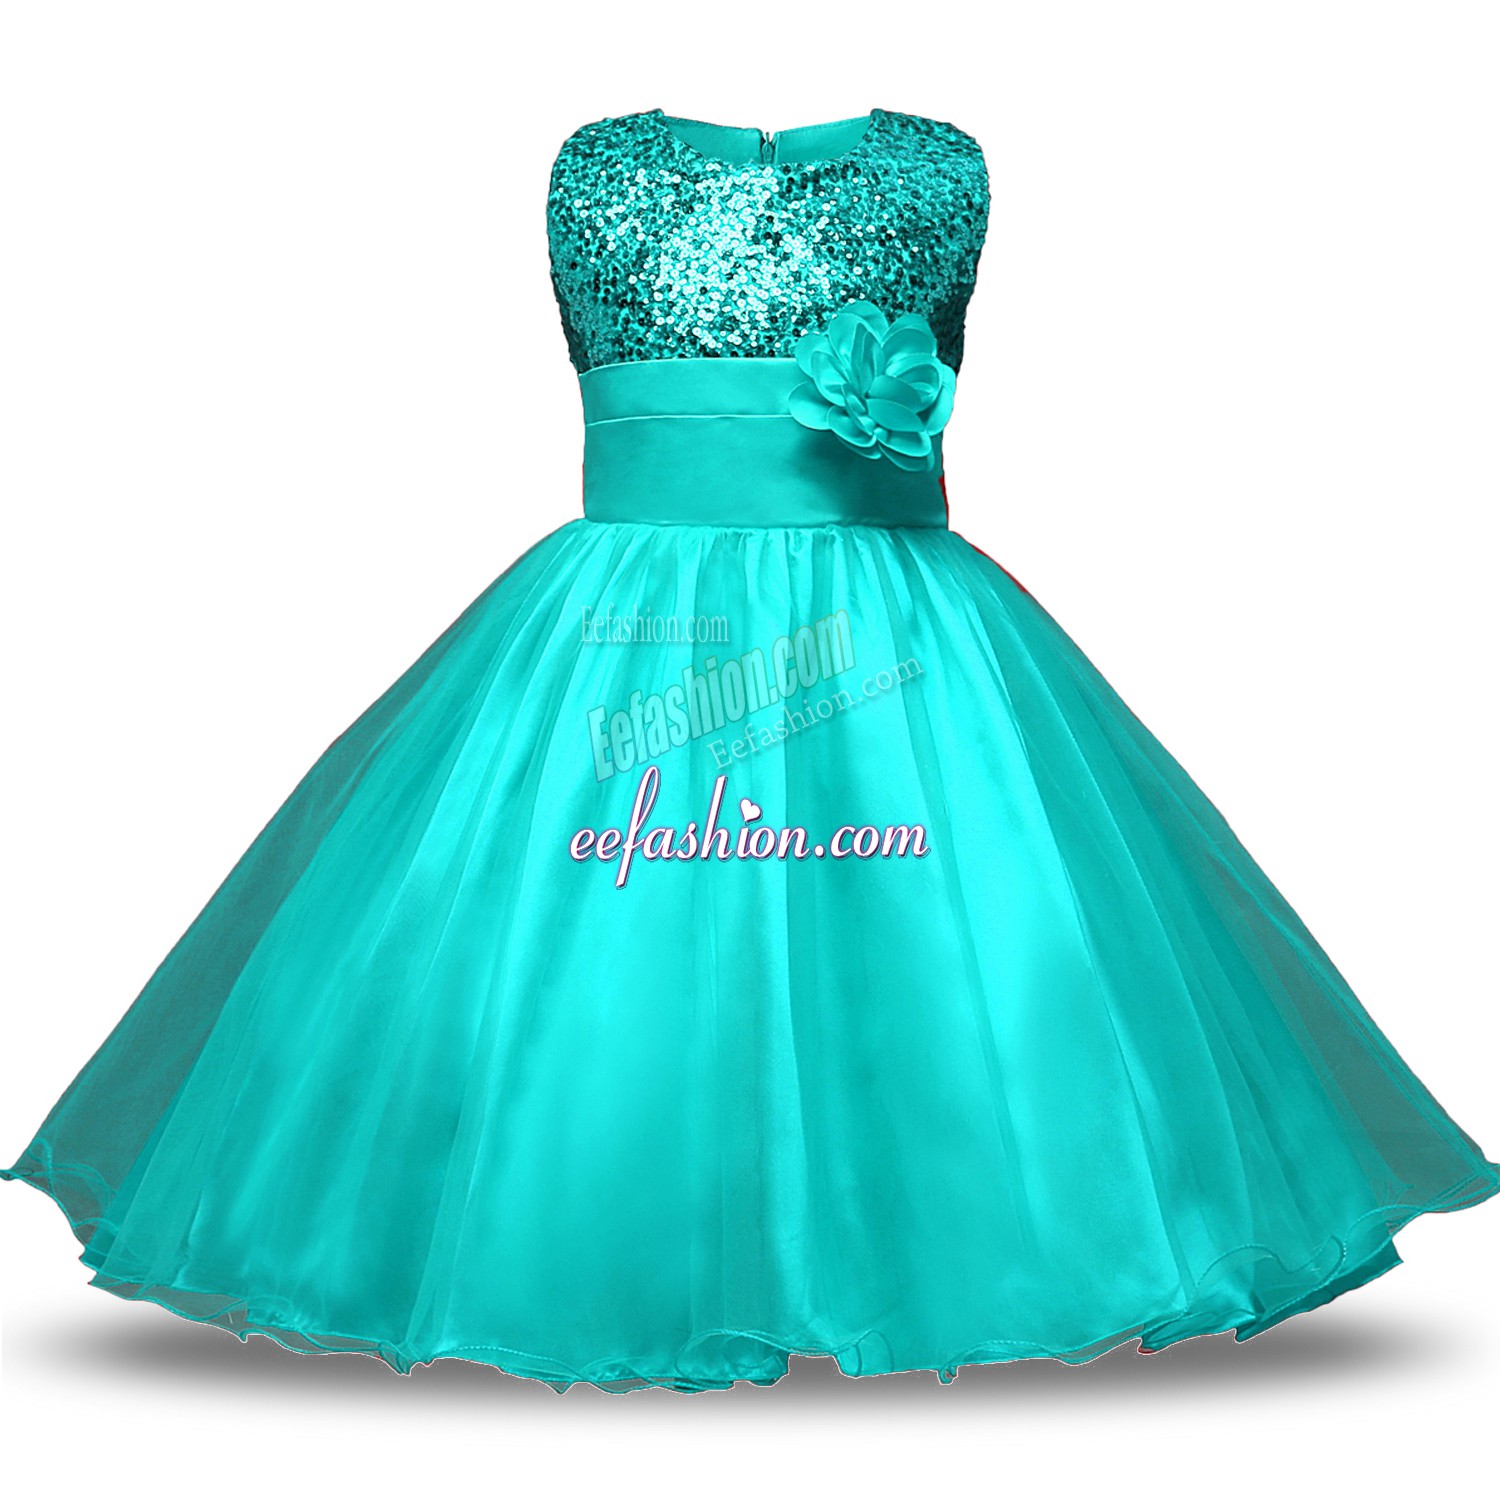  Sleeveless Knee Length Bowknot and Belt and Hand Made Flower Zipper Flower Girl Dresses for Less with Turquoise